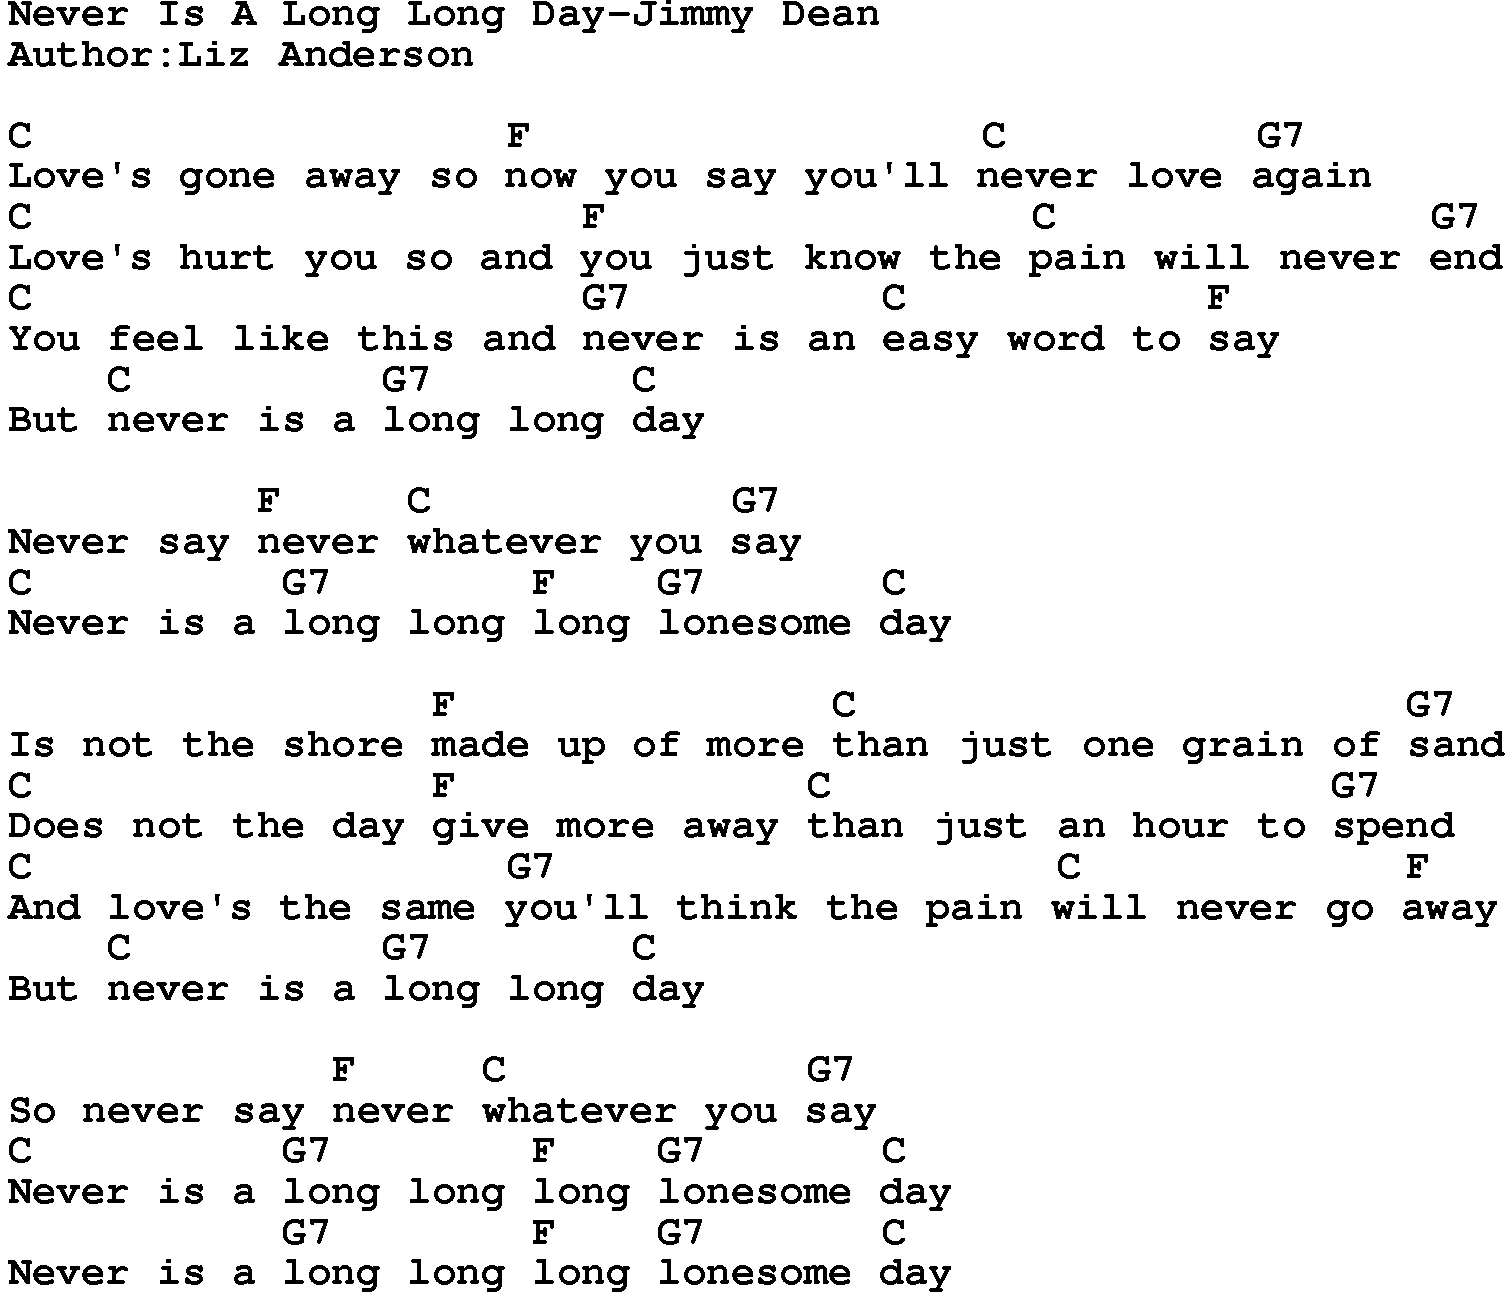 Country music song: Never Is A Long Long Day-Jimmy Dean lyrics and chords